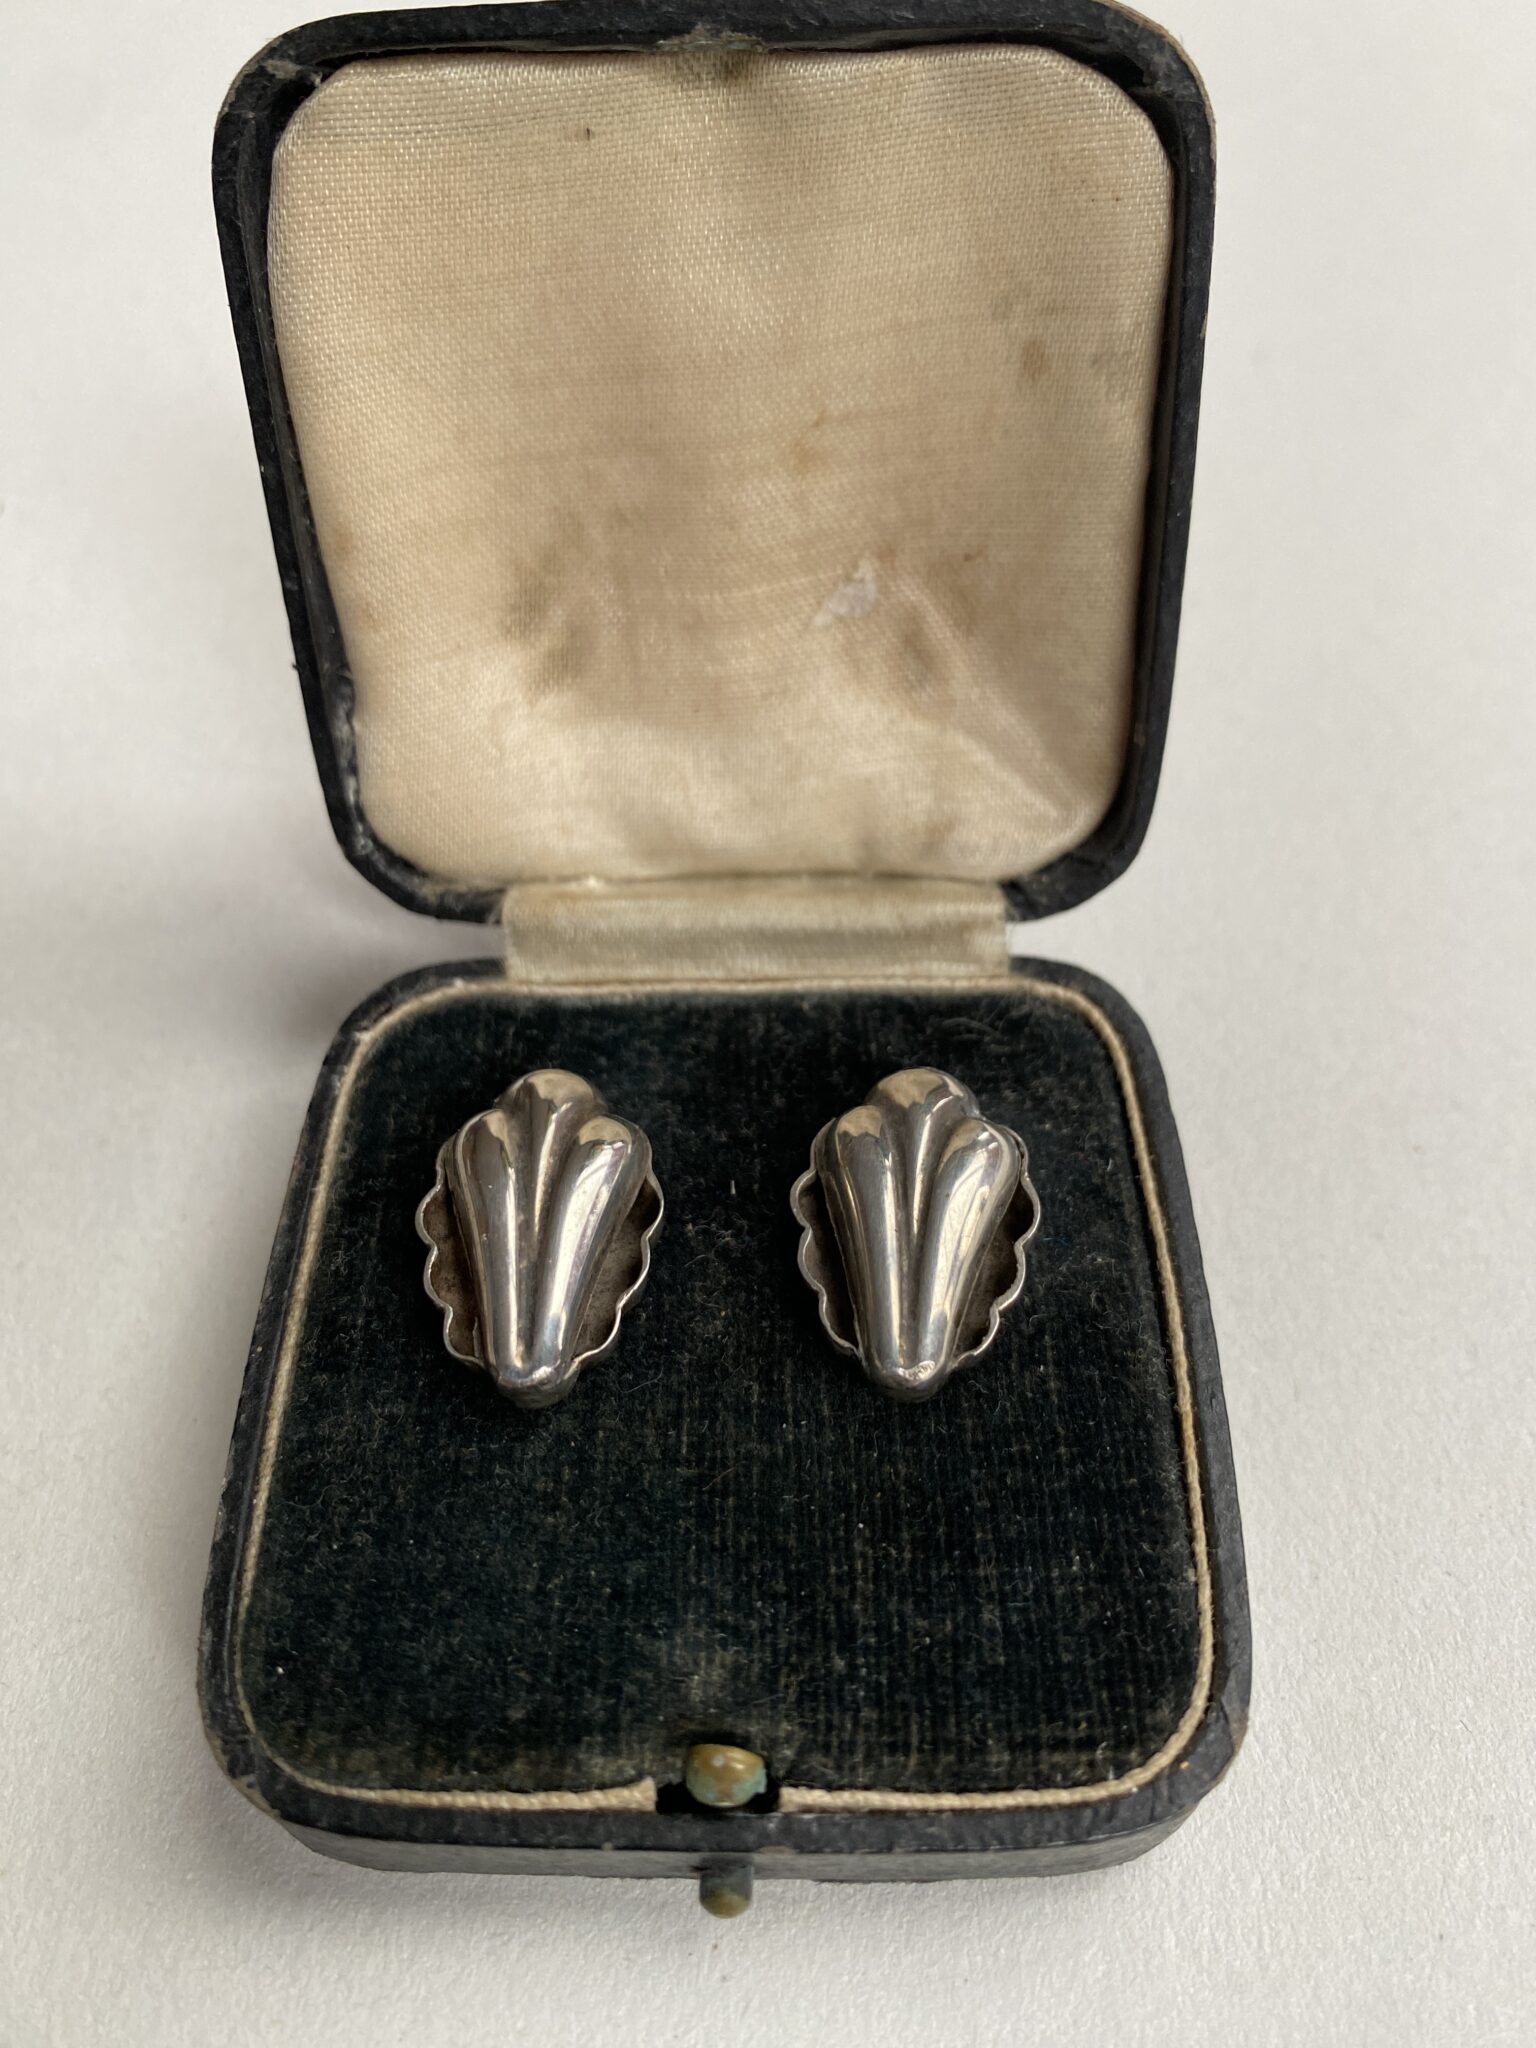 Pair of Miniature ‘Silver’ Ornate Hearing Aids